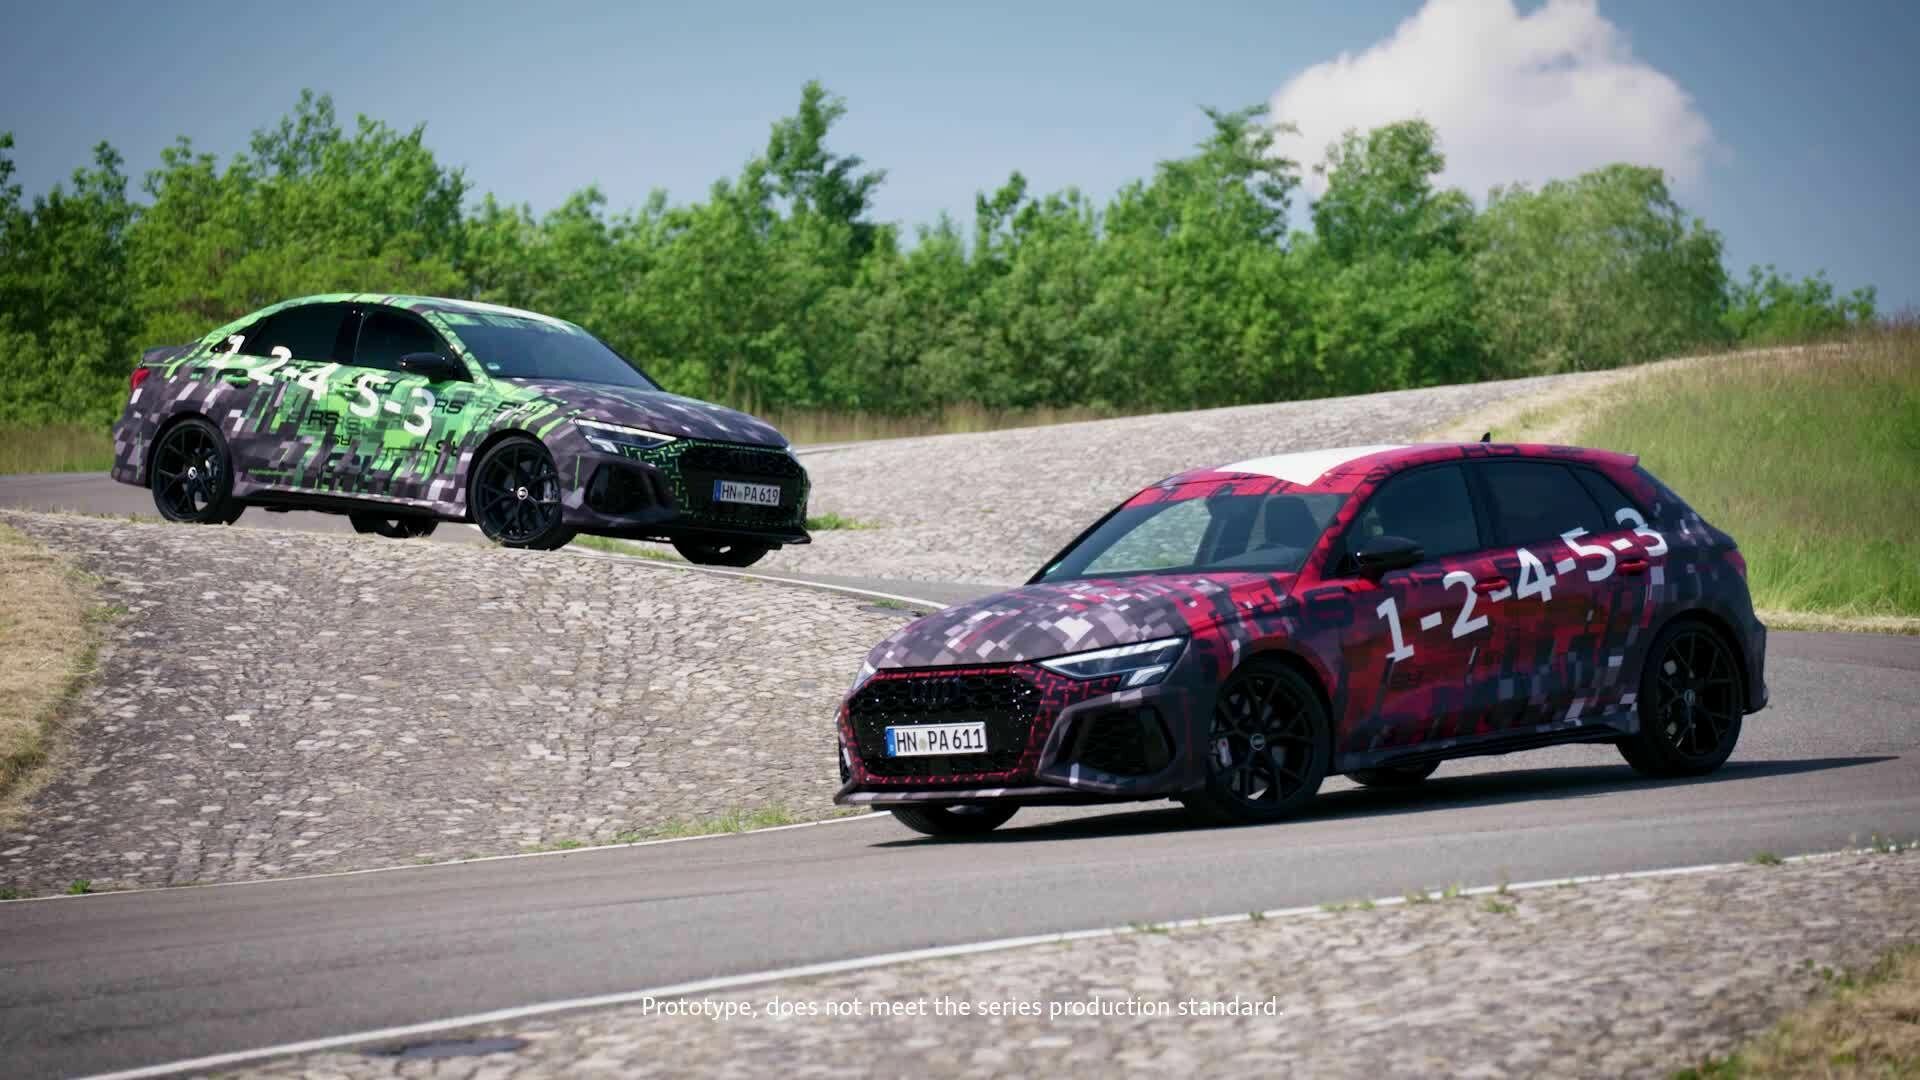 The Audi RS 3 prototypes – the epitome of unadulterated driving dynamics